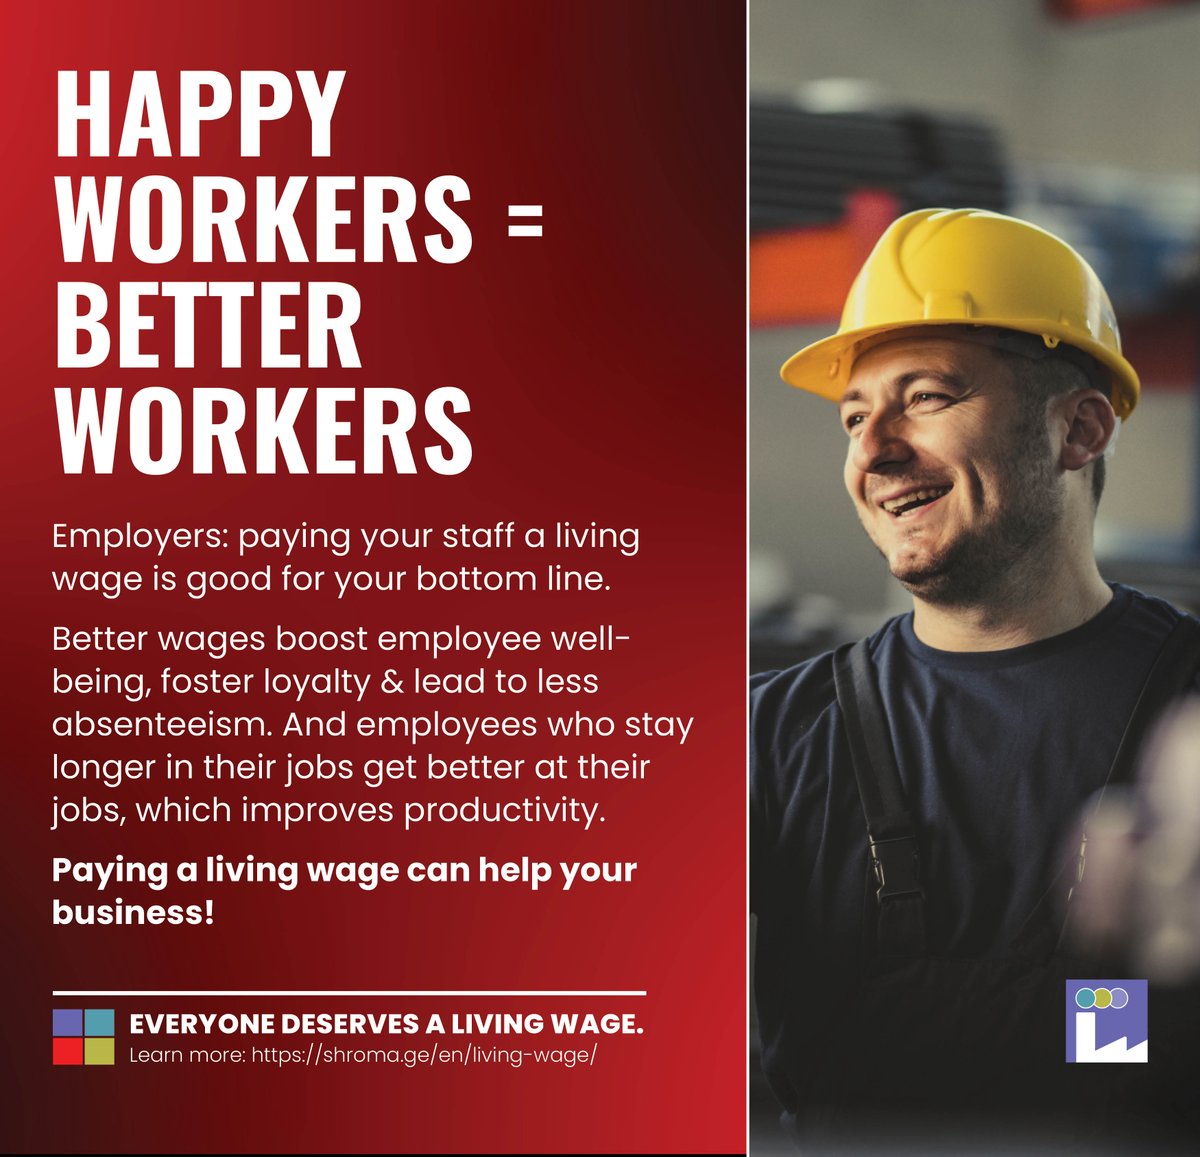 When it comes to growing your business, the old adage is true: the more you invest, the more you earn. Nowhere is that more true than with your workforce. Paying workers a living wage is one of the best investments you can make. Learn more: shroma.ge/en/living-wage…